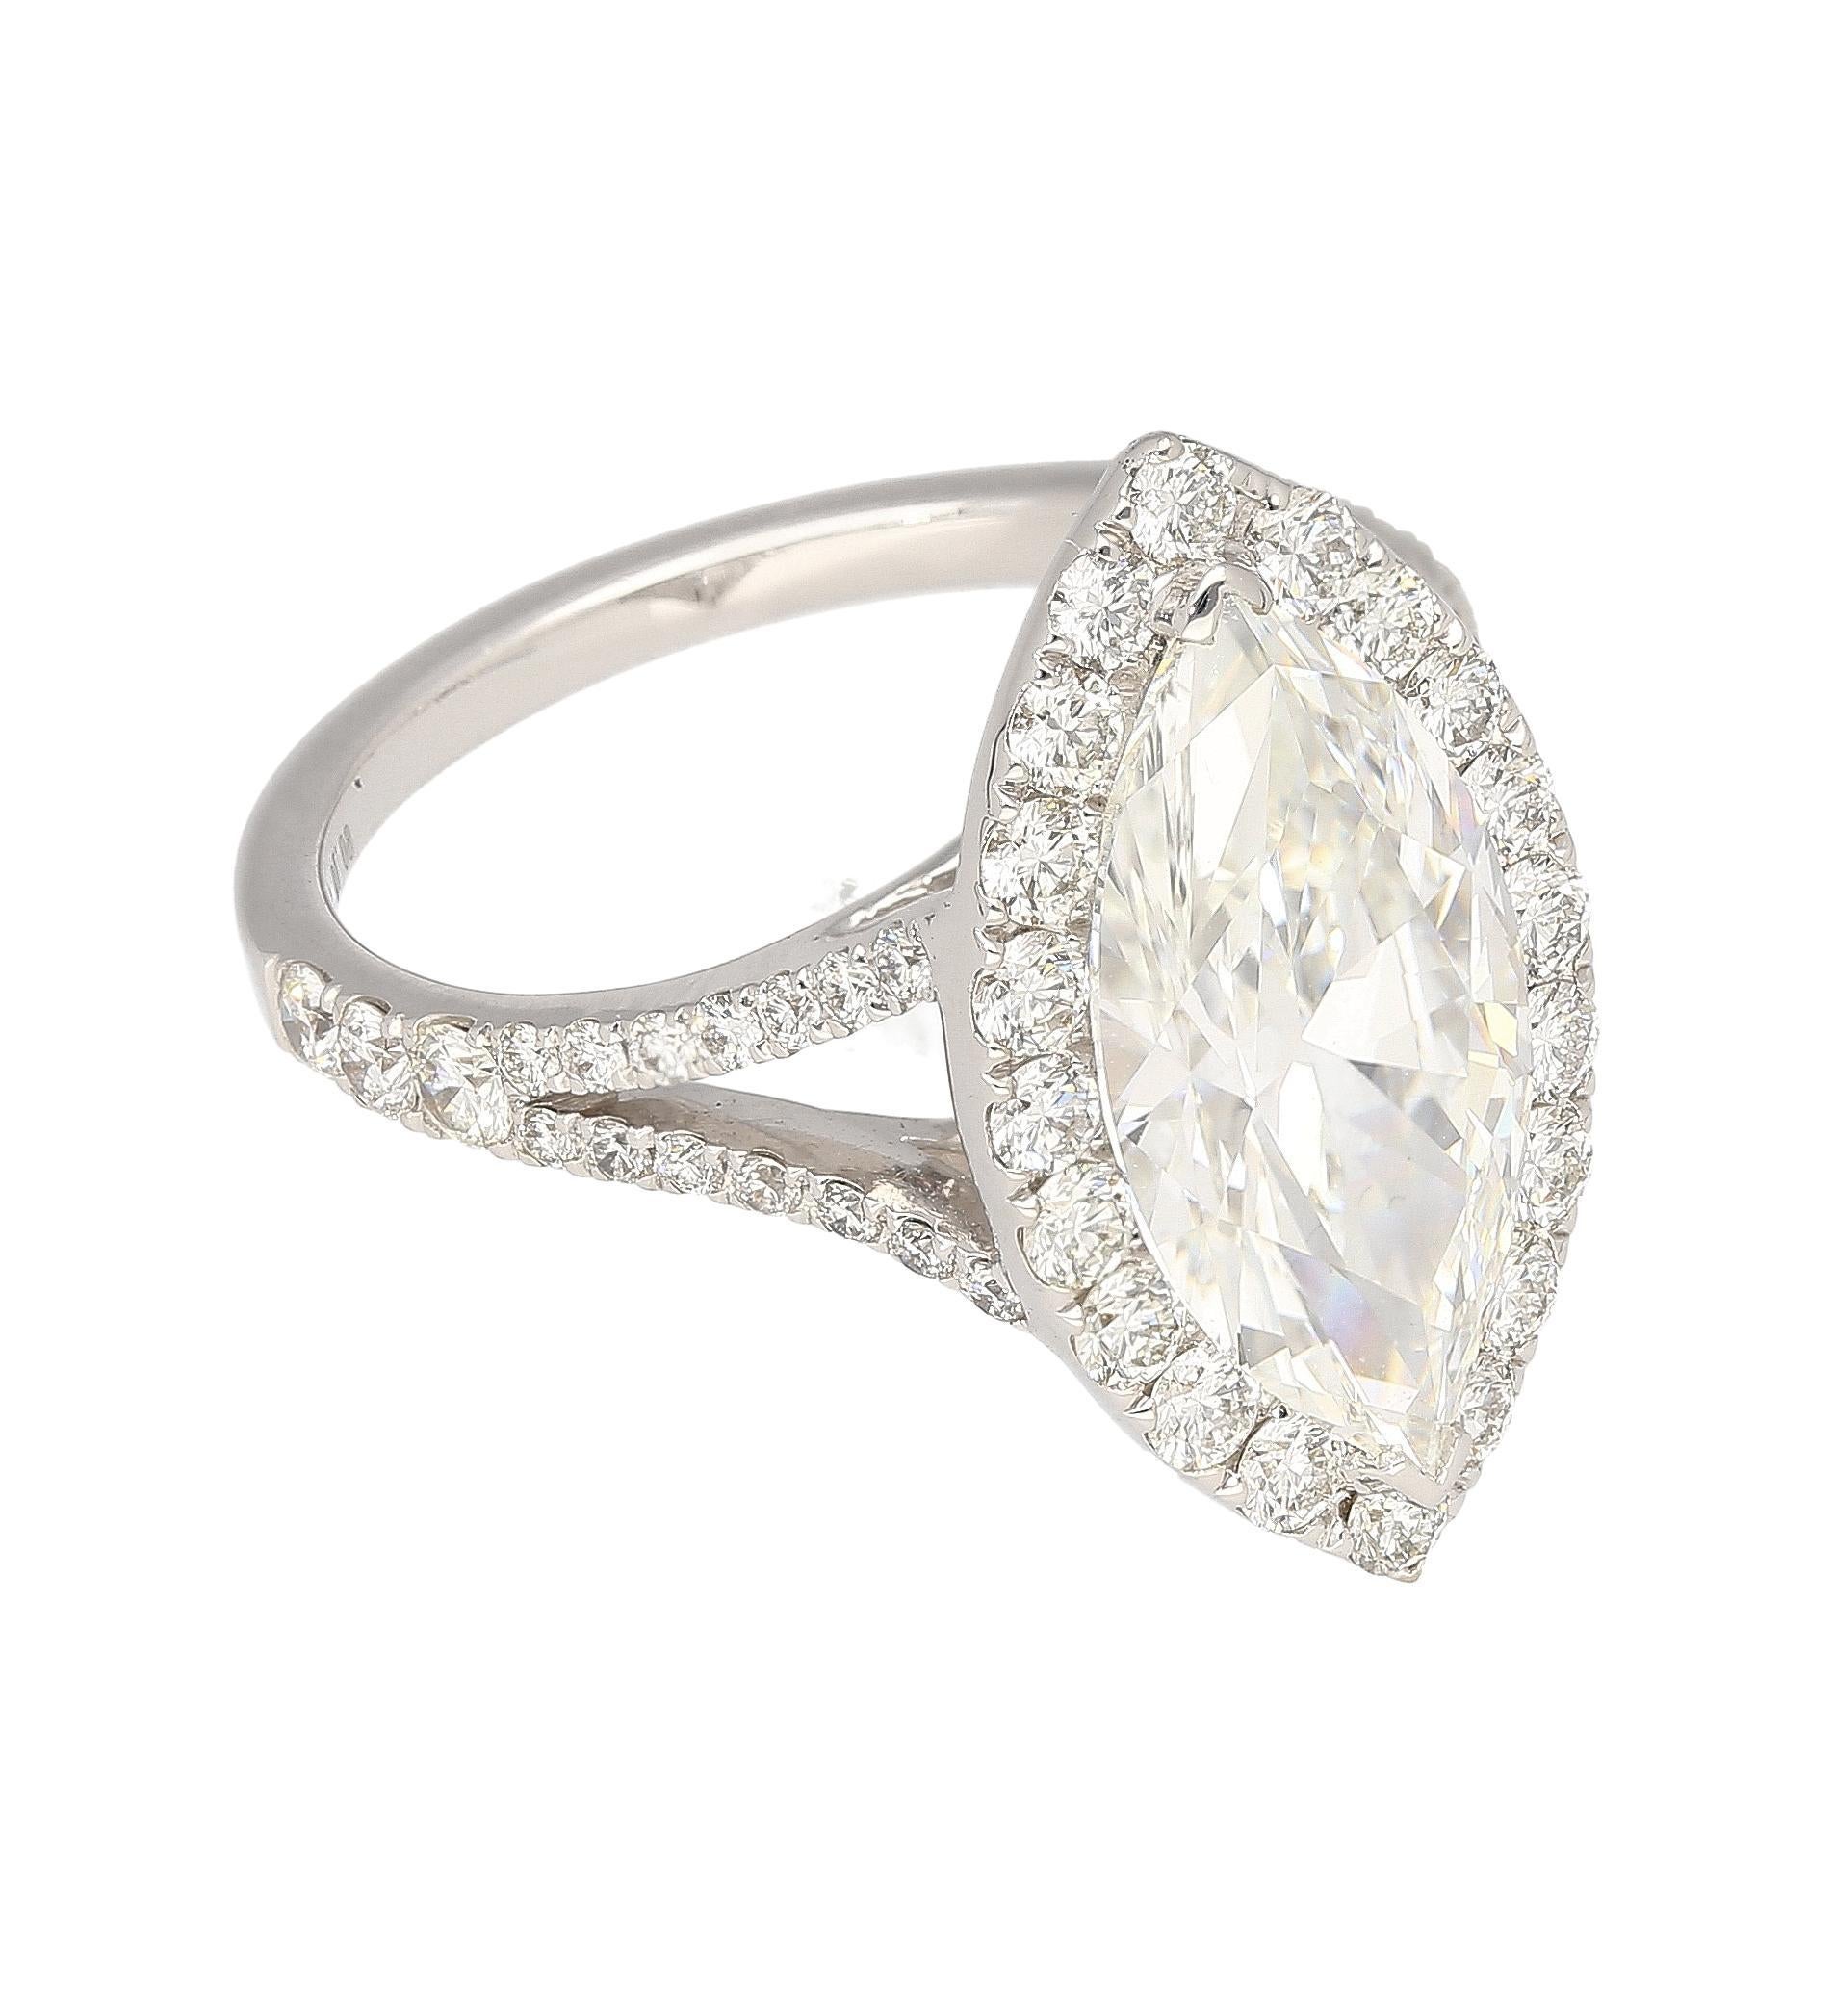 3.22 Carat Marquise Cut G VS1 GIA Certified Diamond Halo Pave 18K Ring In Good Condition For Sale In Miami, FL